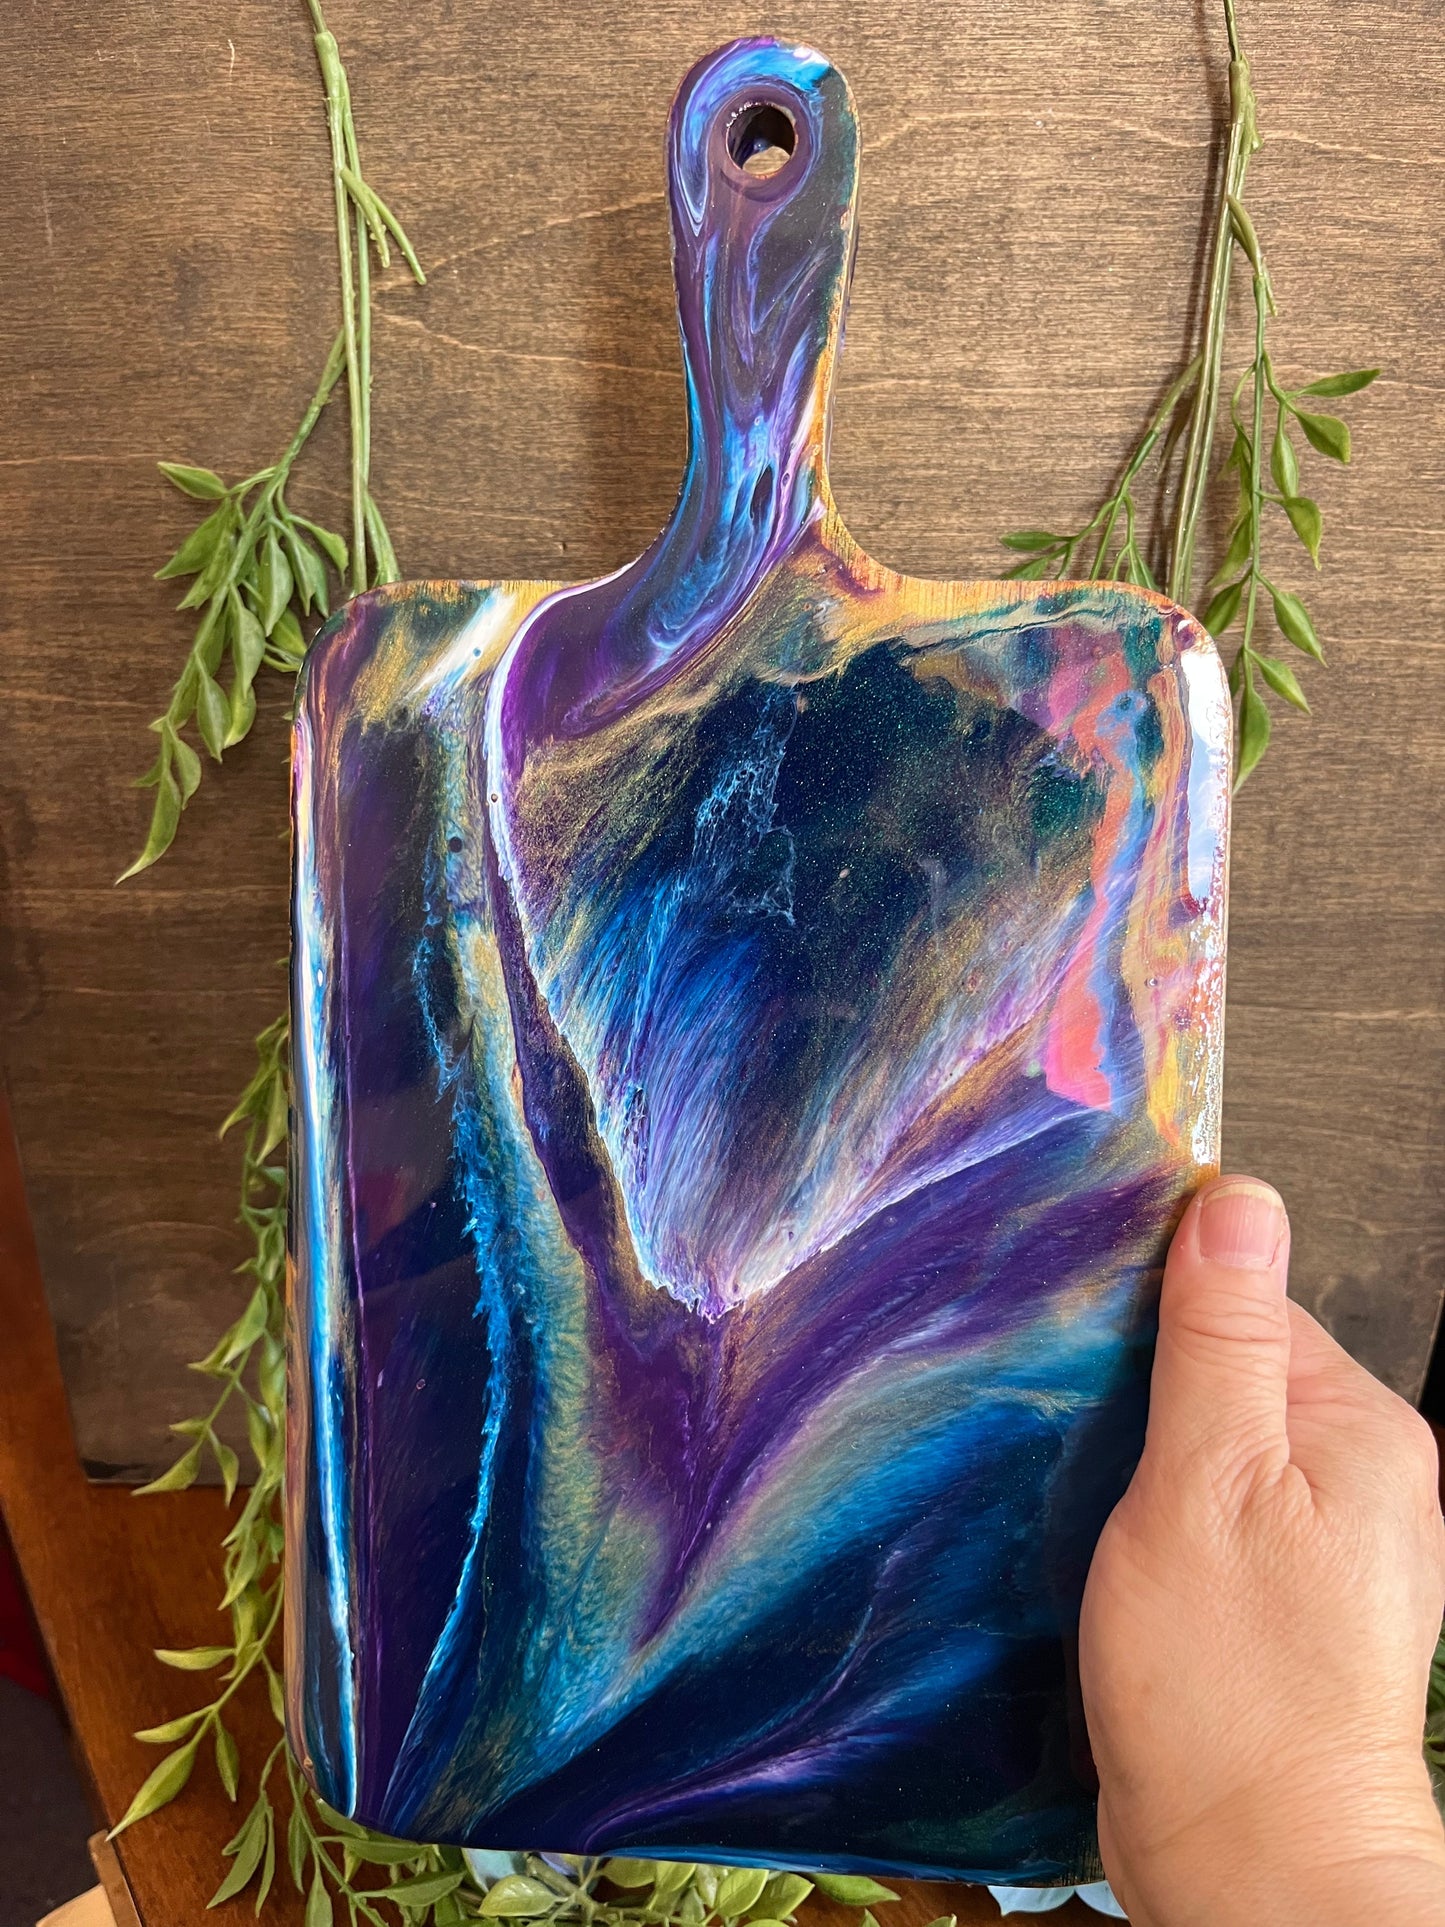 PRIVATE LISTING - Resin Class - Personal size Cutting board - 8/26 @ 1pm (Copy)